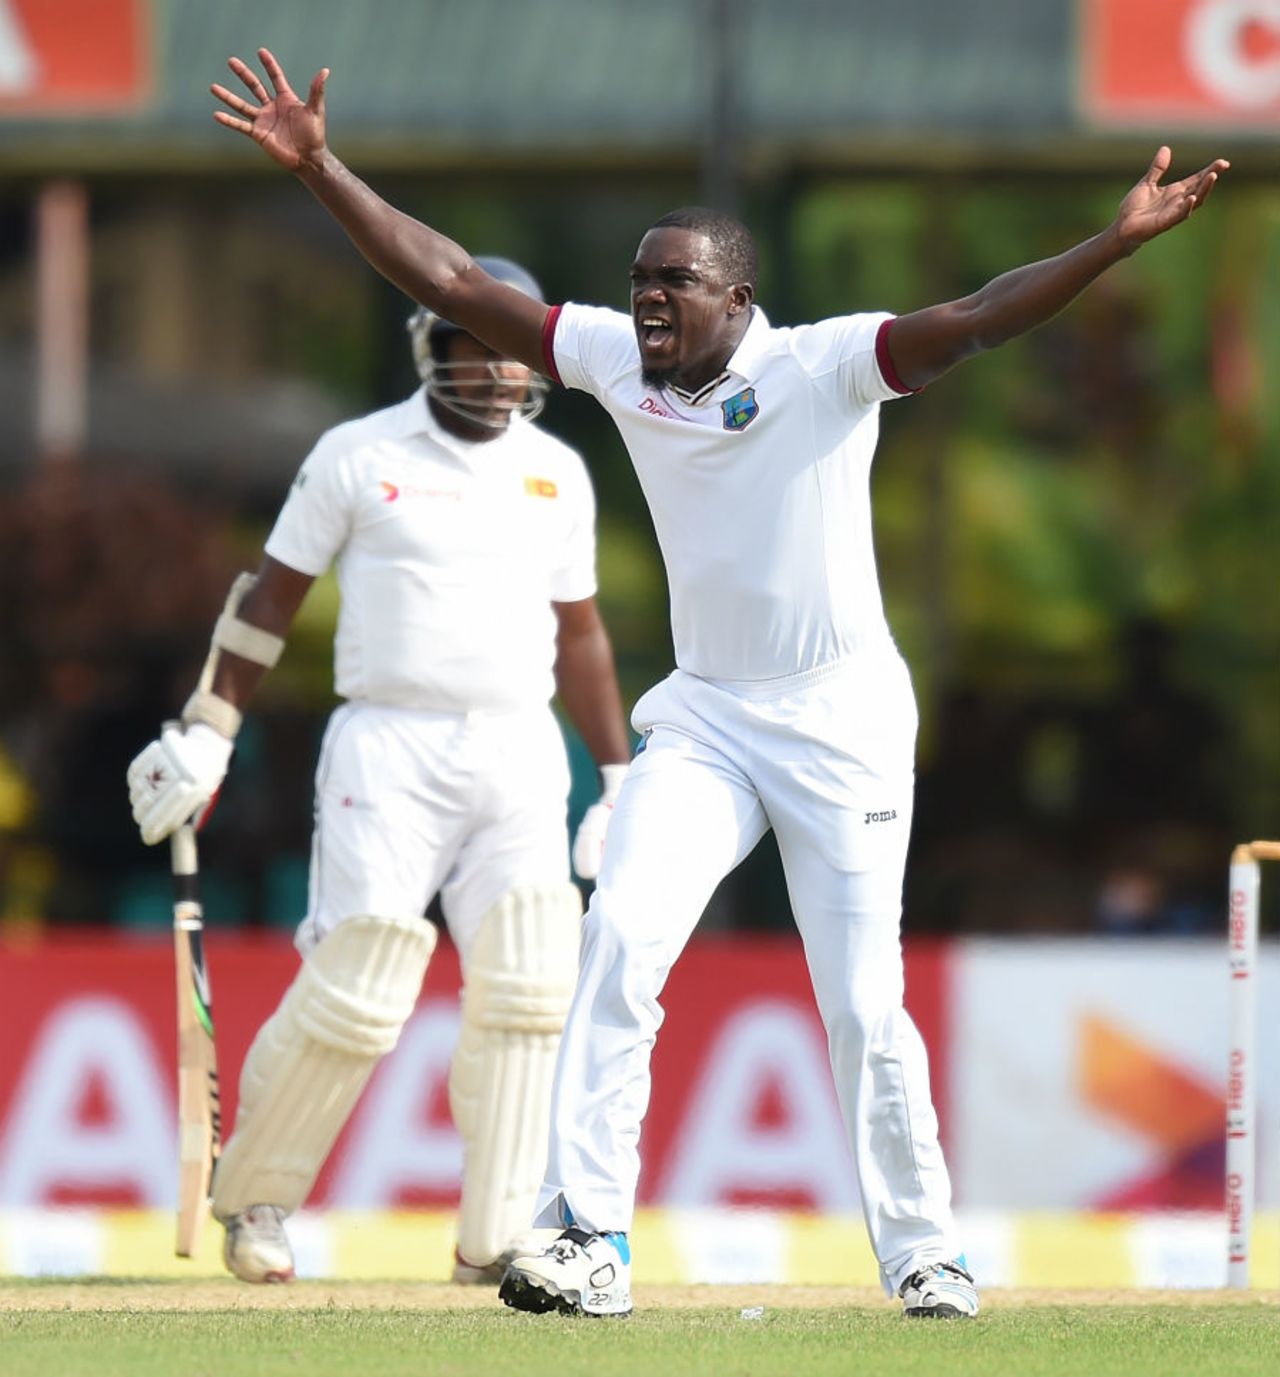 Jerome Taylor appeals for the wicket of Rangana Herath, Sri Lanka v West Indies, 2nd Test, Colombo, 1st day, October 22, 2015